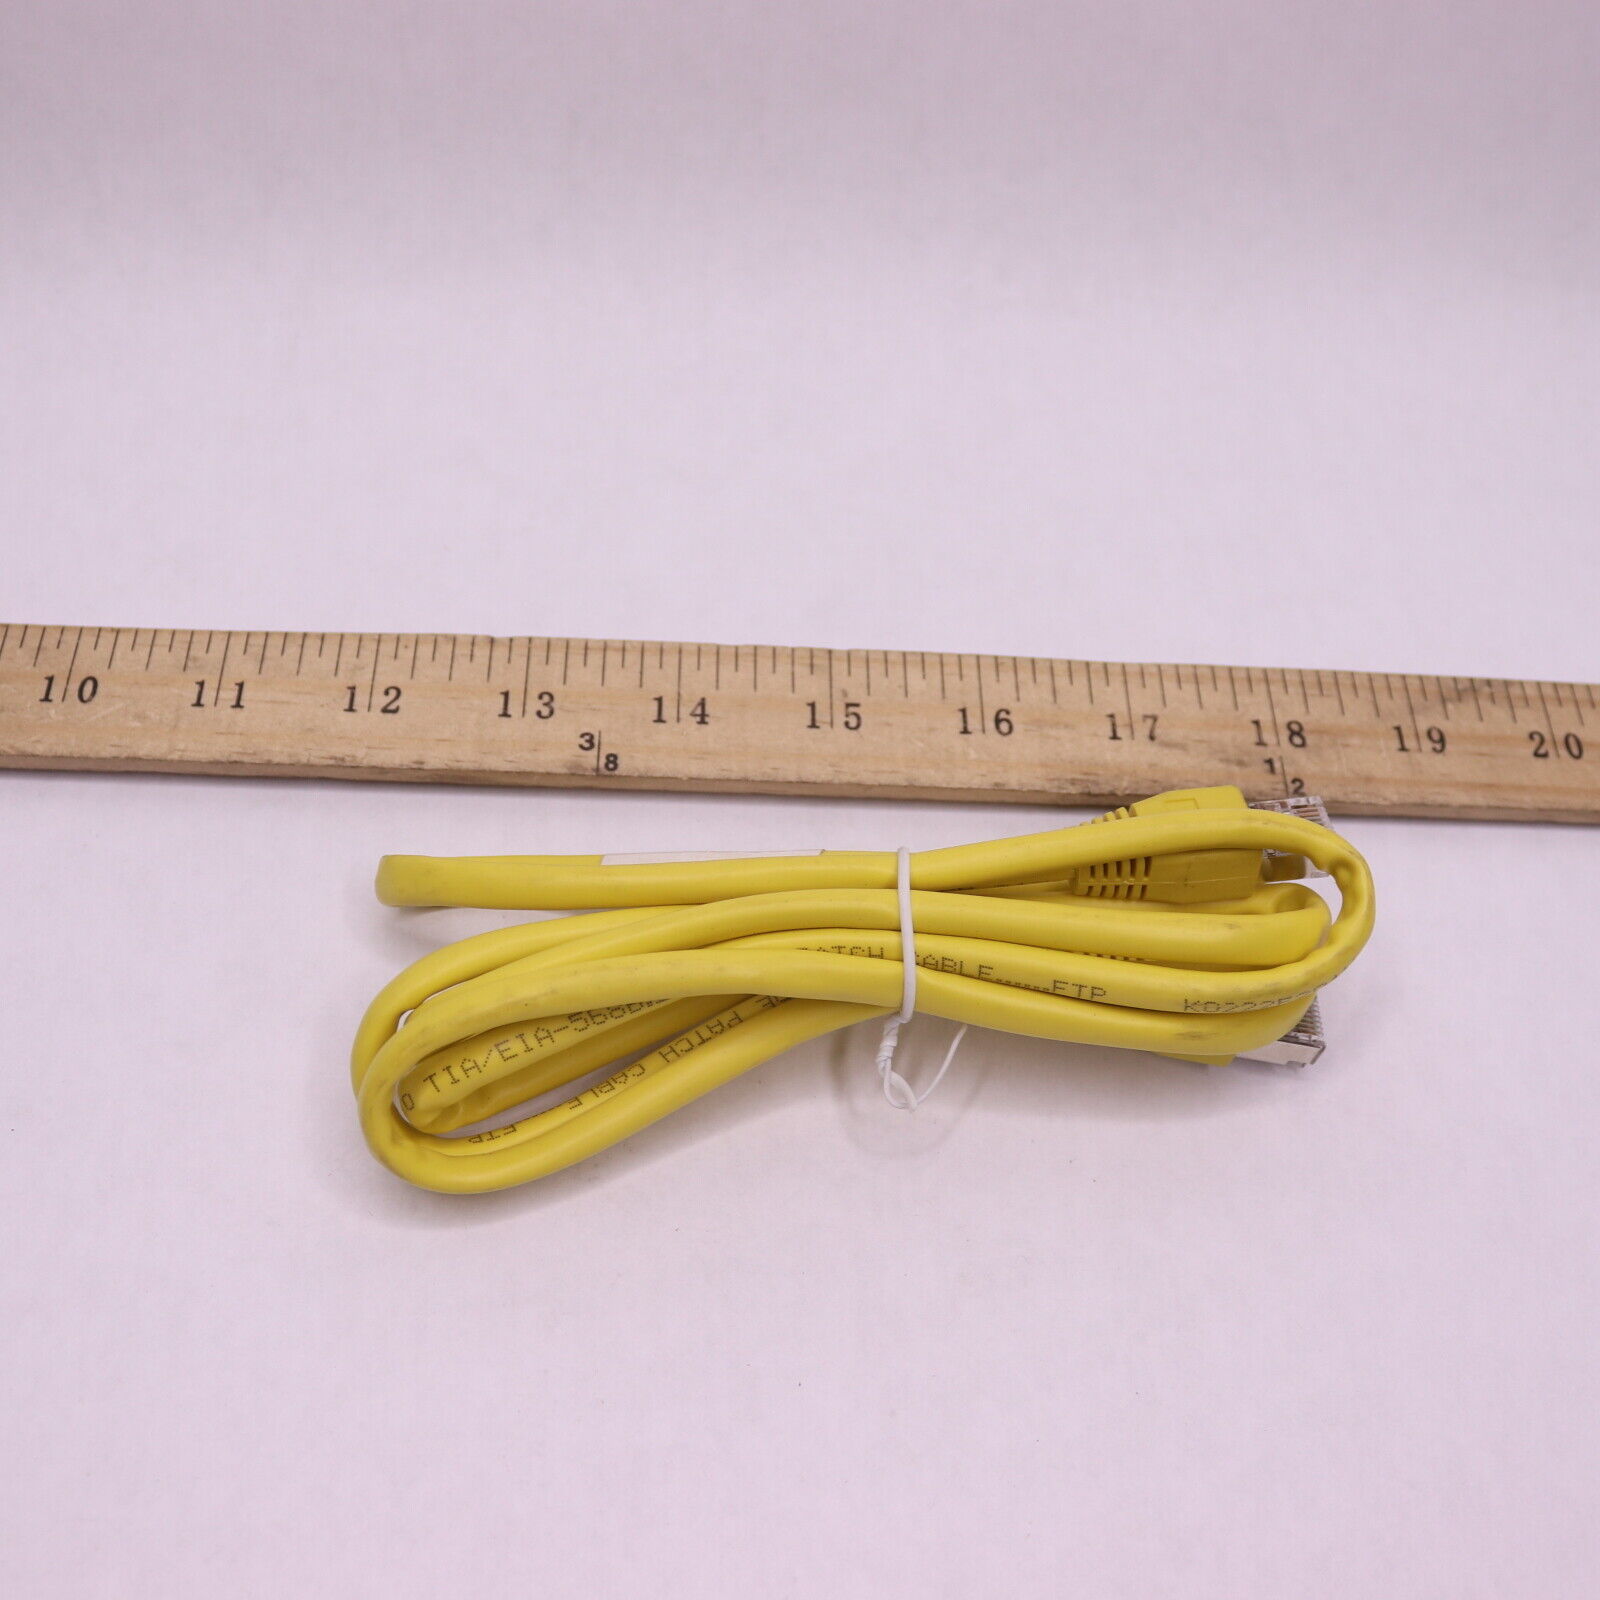 LAN Ethernet Network Cable Yellow Cat5e RJ45 24AWG 1.5m 312-10017-02